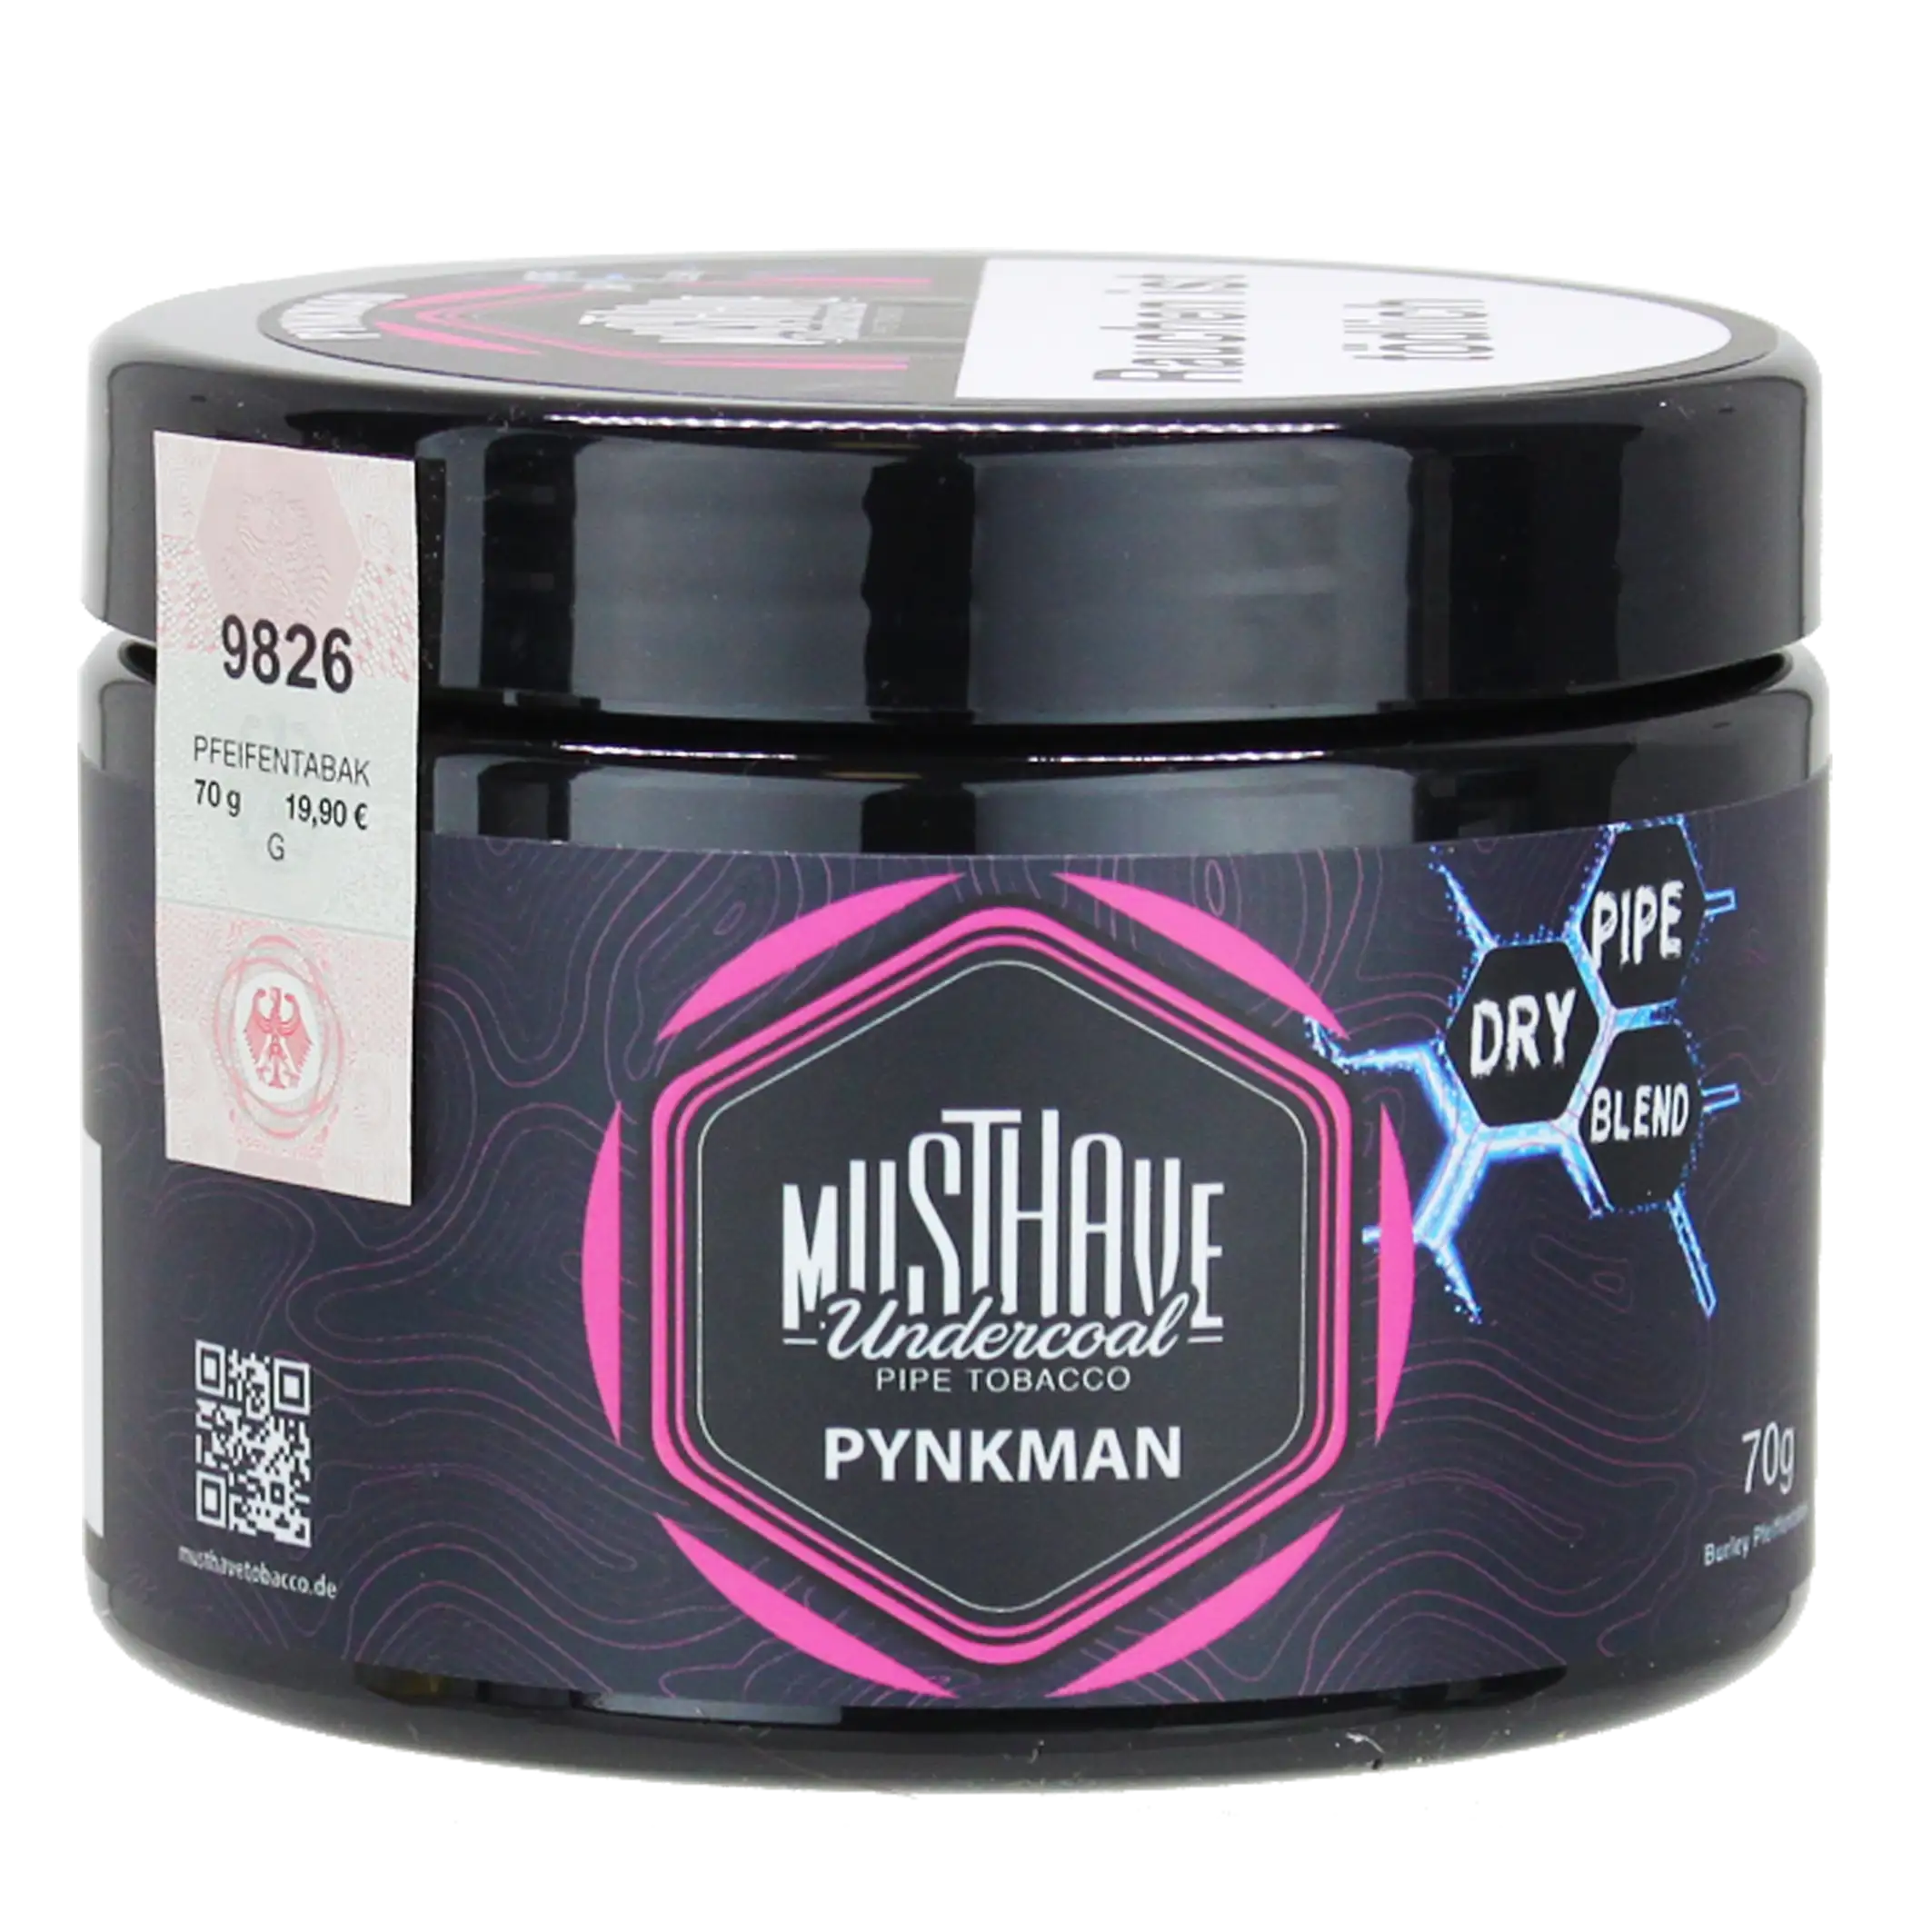 Musthave Dry Base Tabak Pynkman 70g